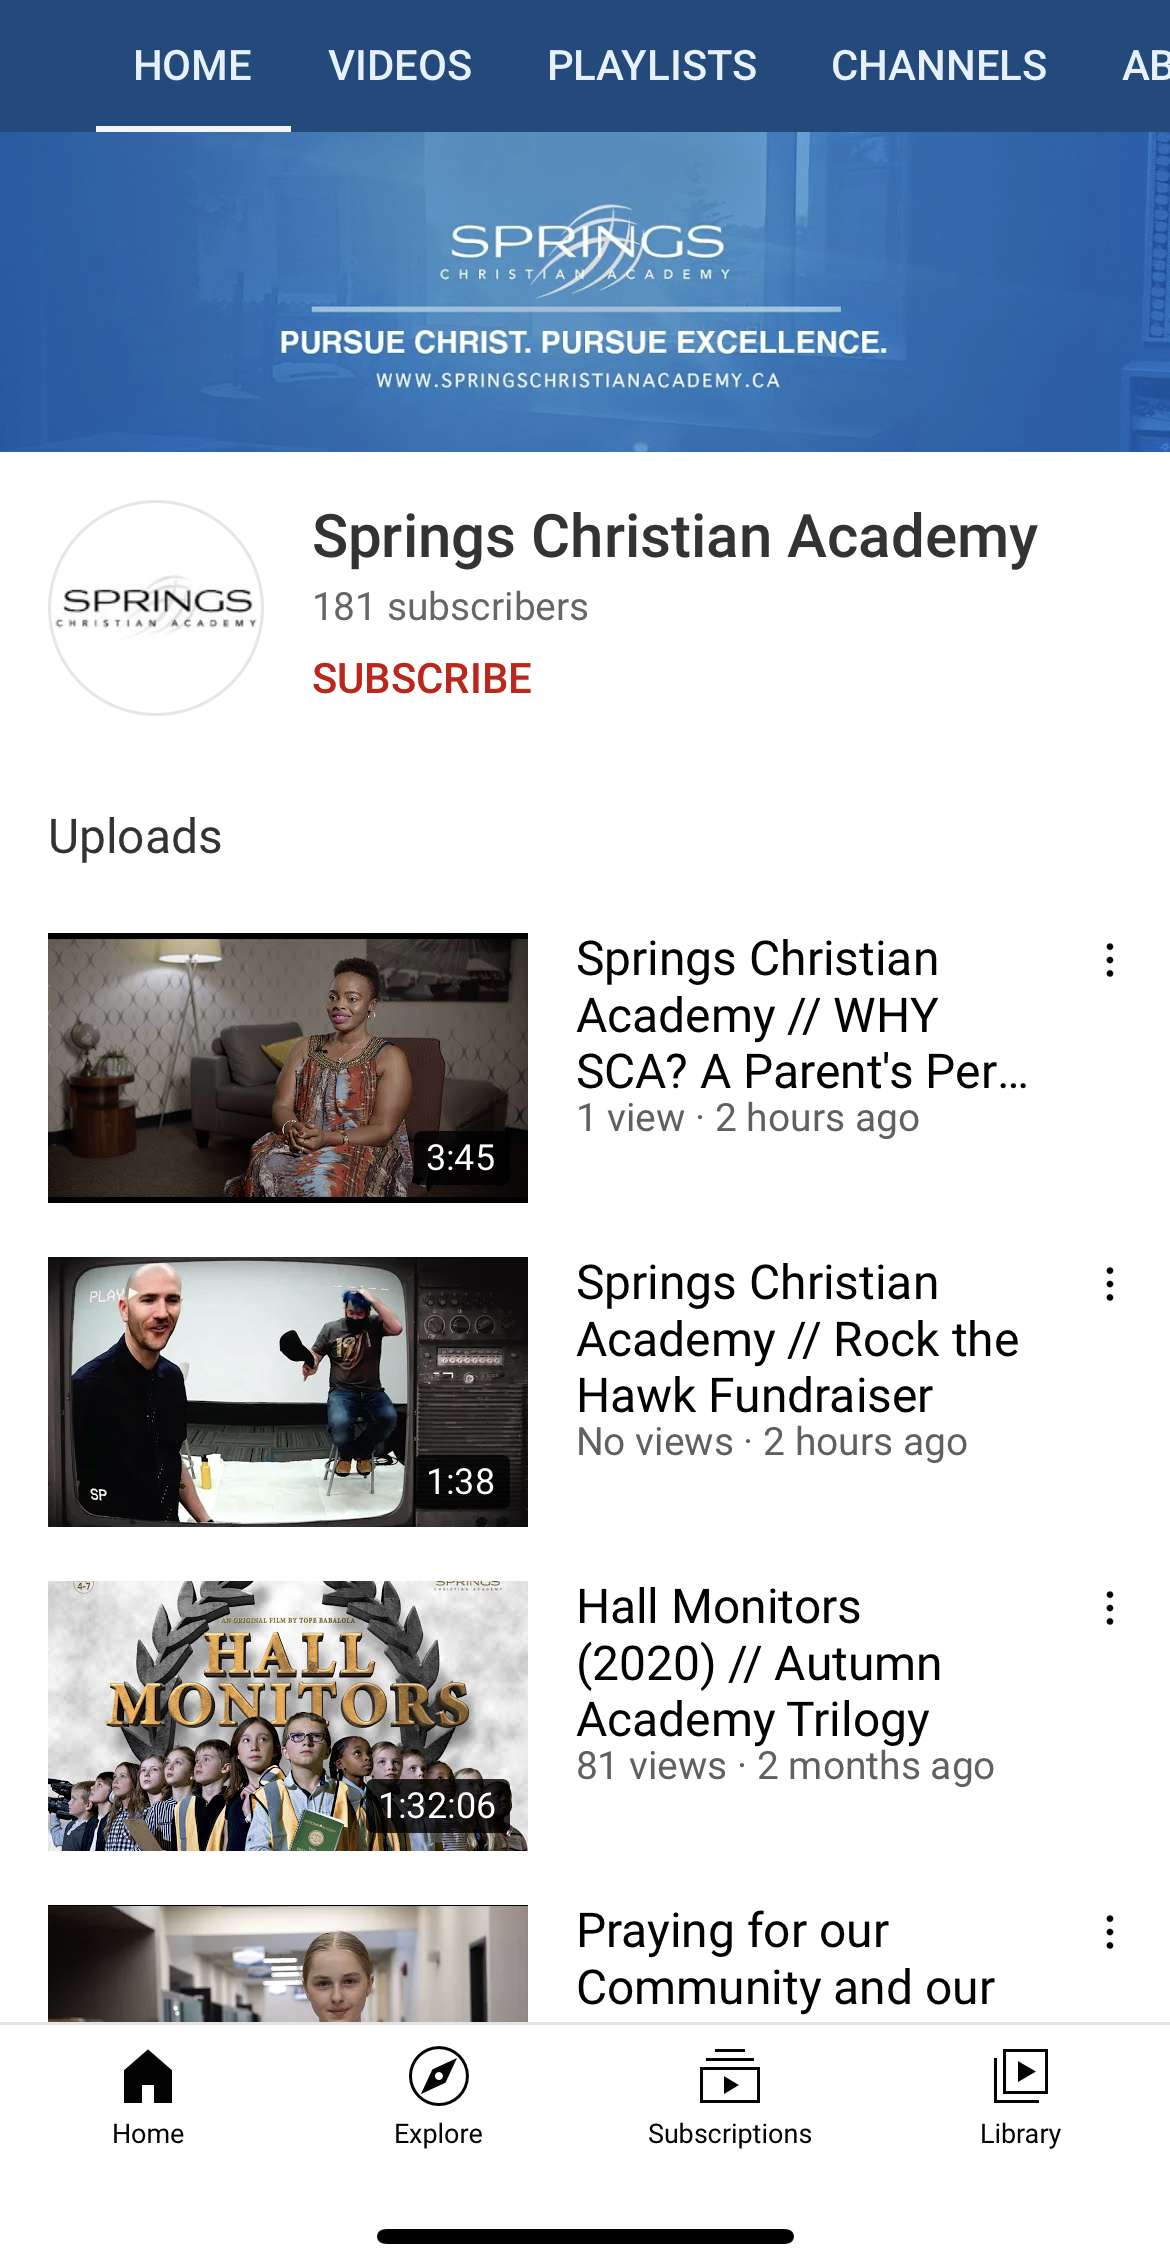 SCA Videos on YouTube